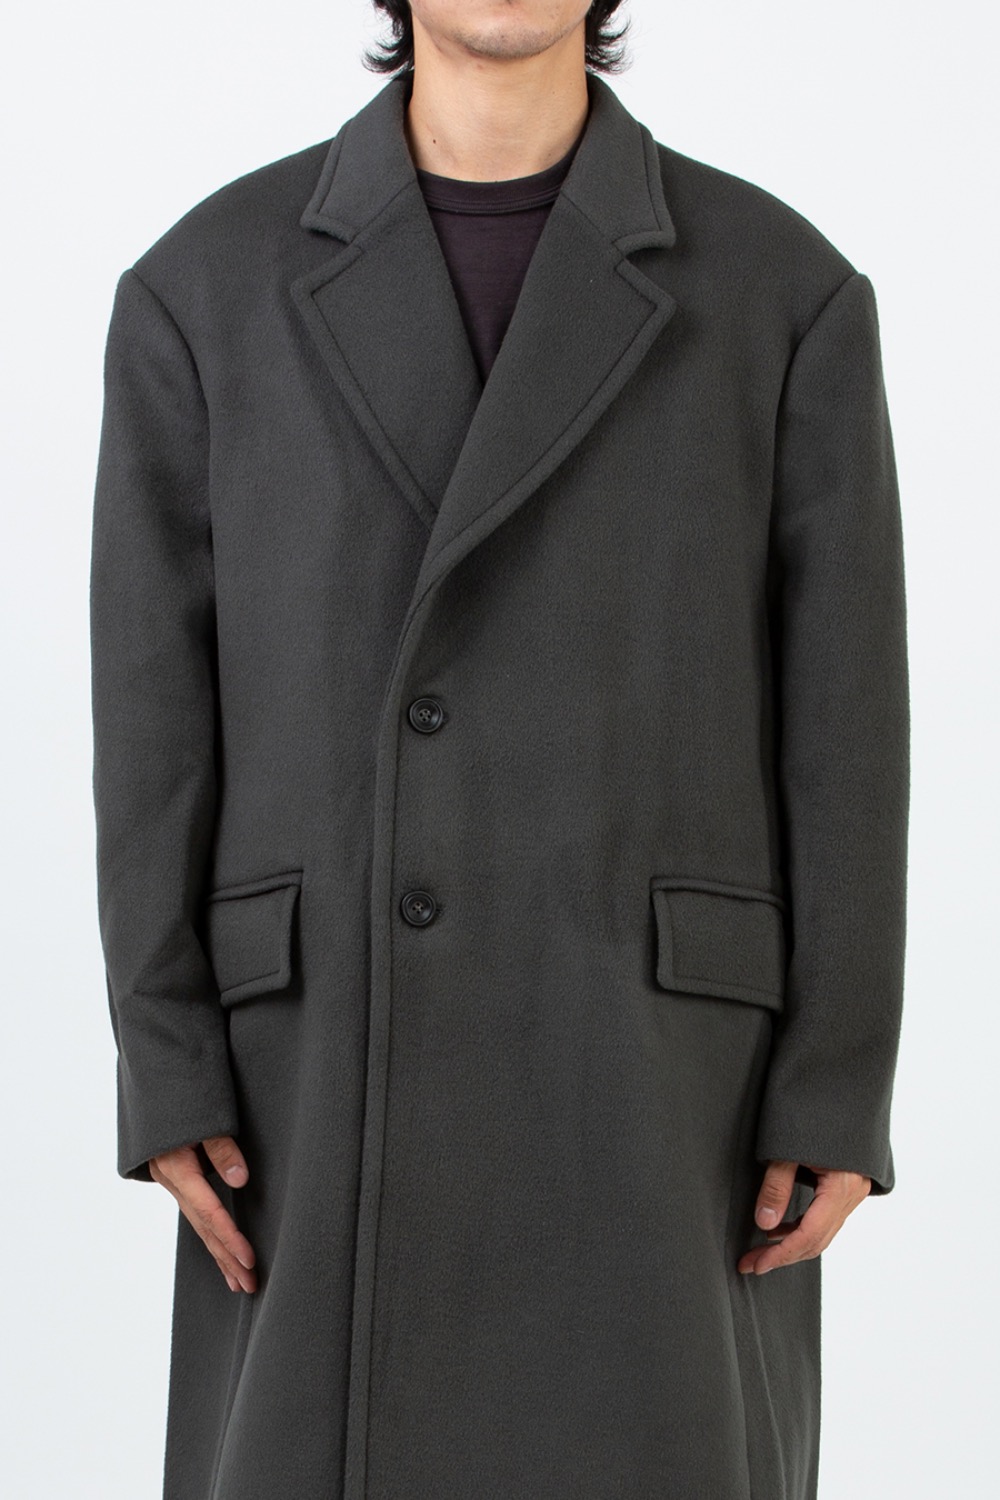 OVERSIZED CHESTERFIELD COAT CHARCOAL